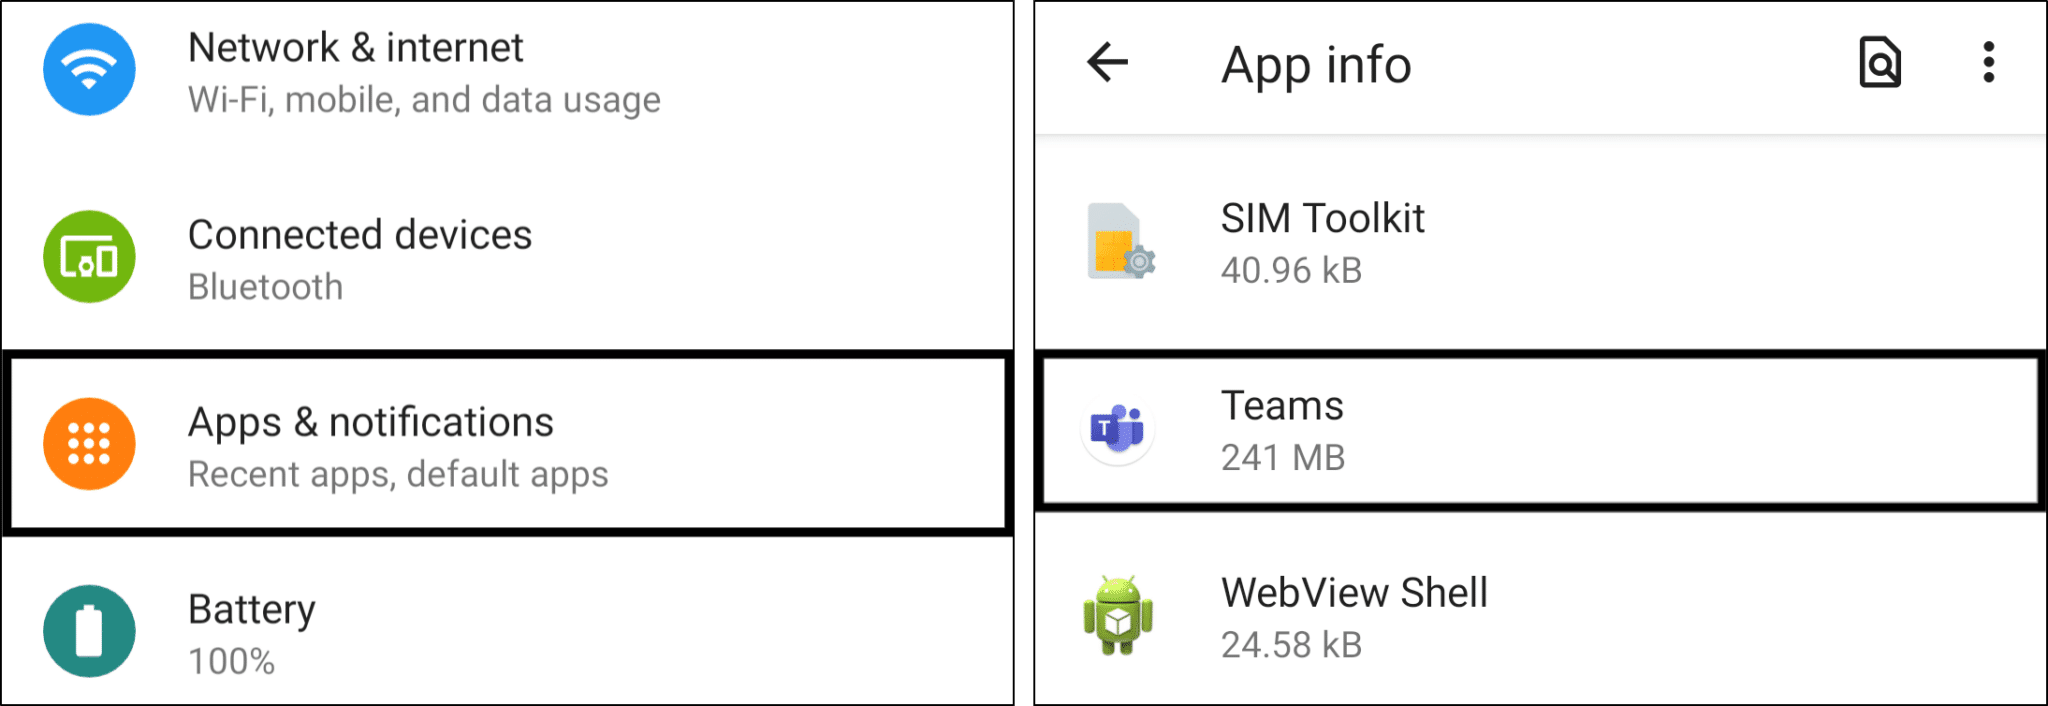 access Microsoft Teams app settings in system settings on Android to allow Files and Media permissions to fix Microsoft Teams files and folders not showing, loading, or downloading